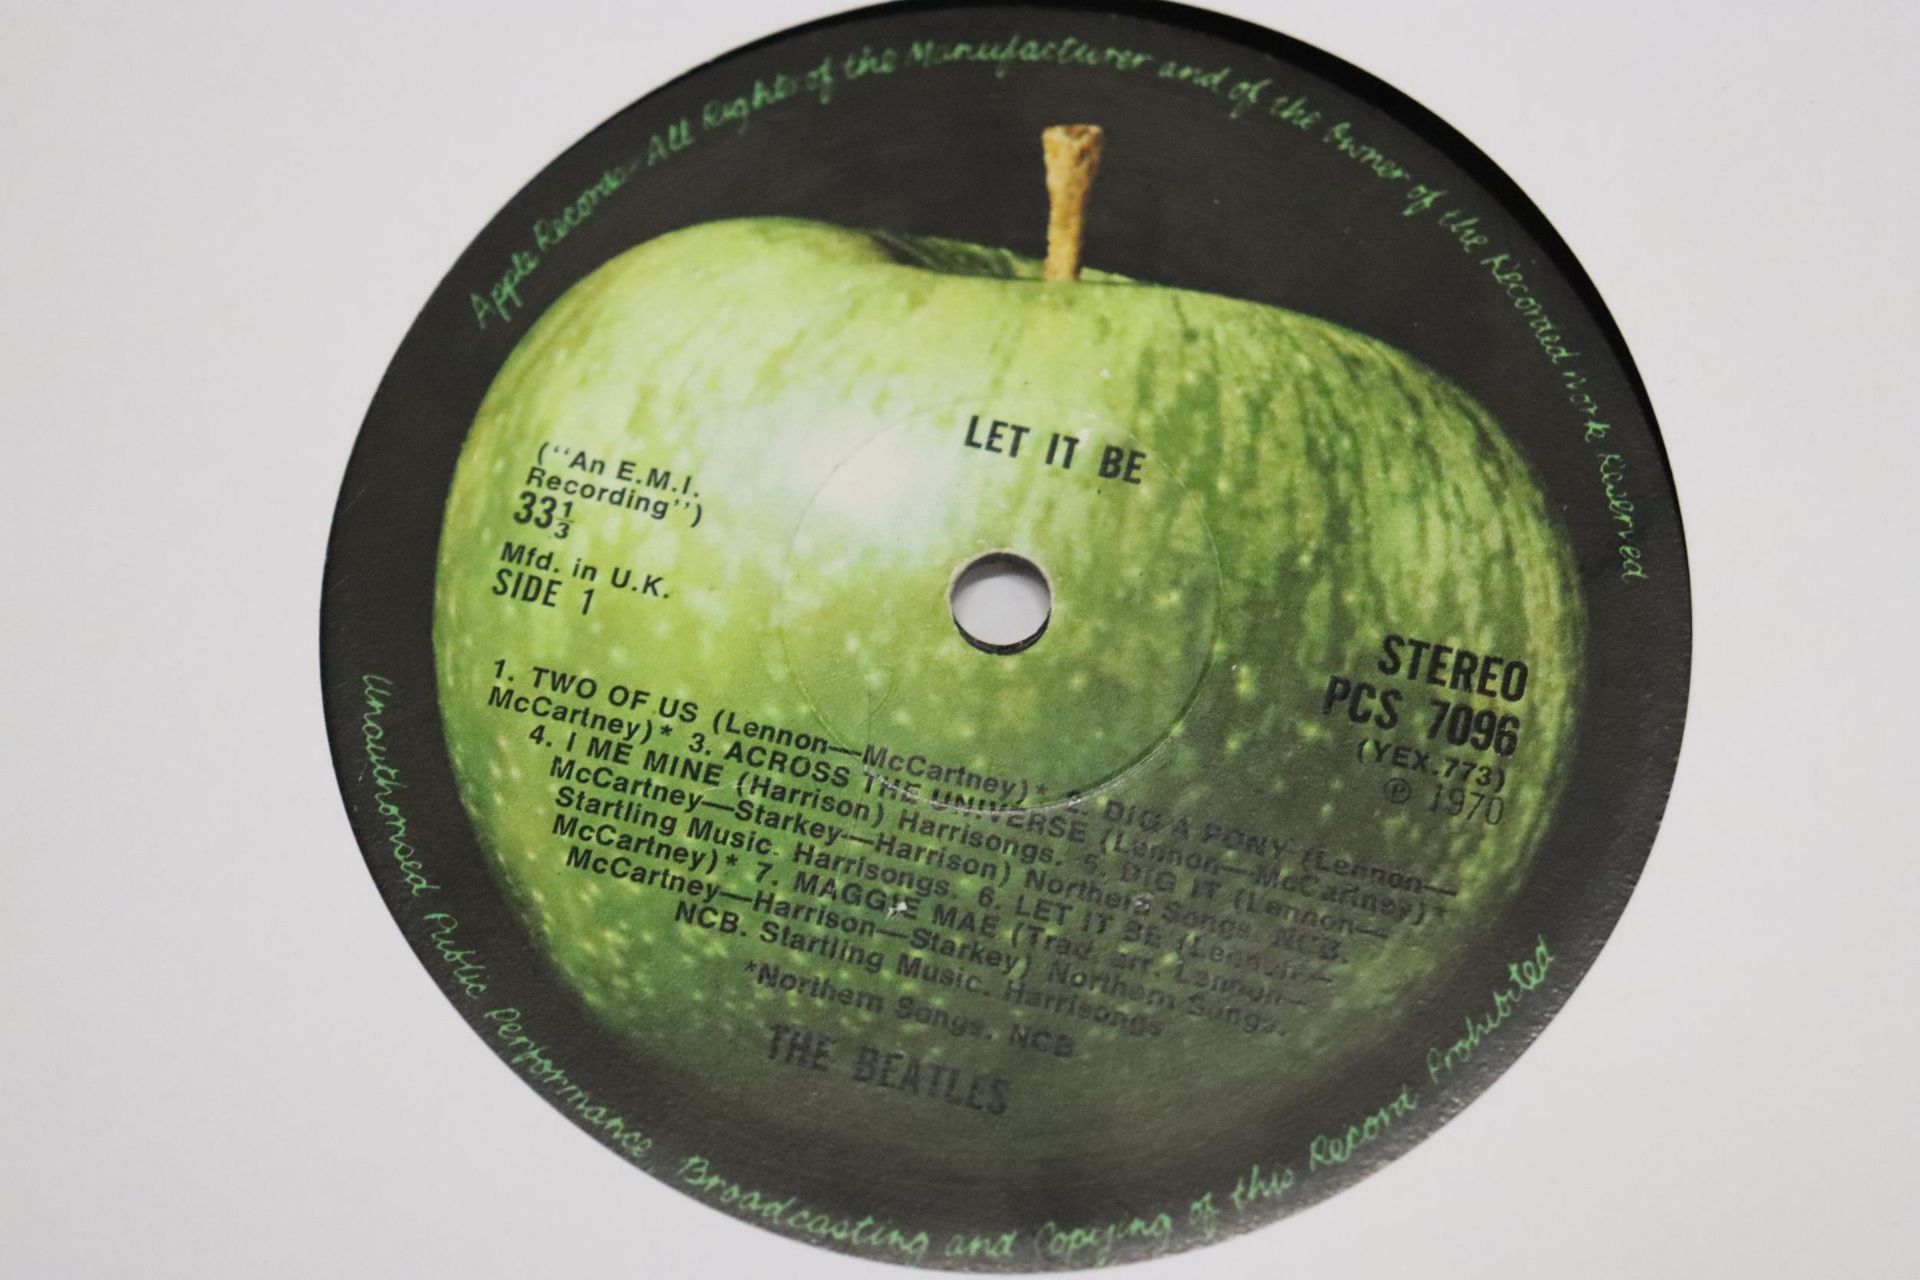 TWO BEATLES LP'S - LET IT BE (1970) AND THE BEATLES (1968) (NO COVERS) - Bild 7 aus 7